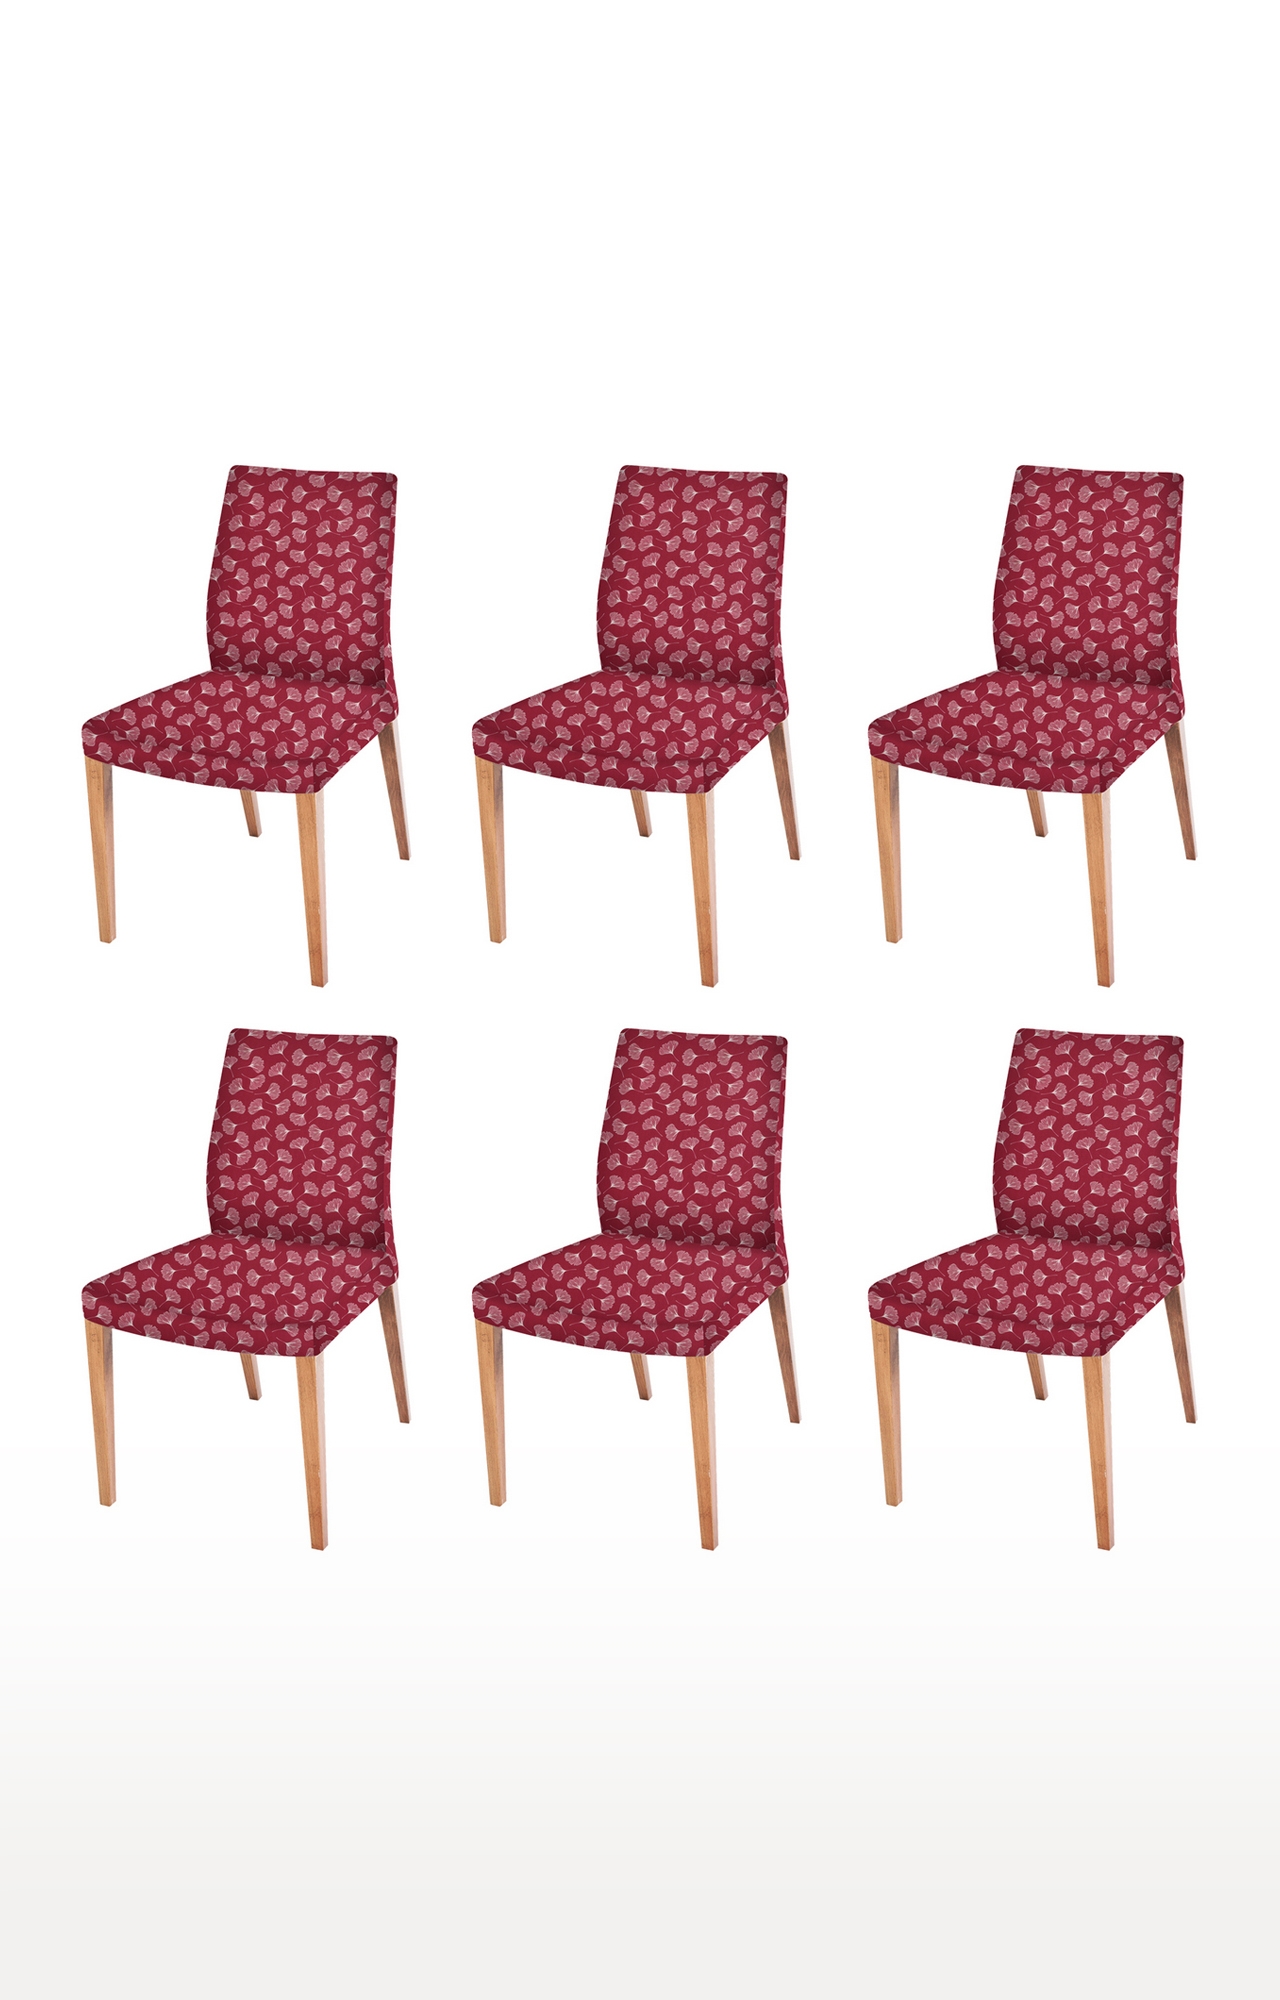 COOQS | Maroon Chair Cover (Pack of 6)